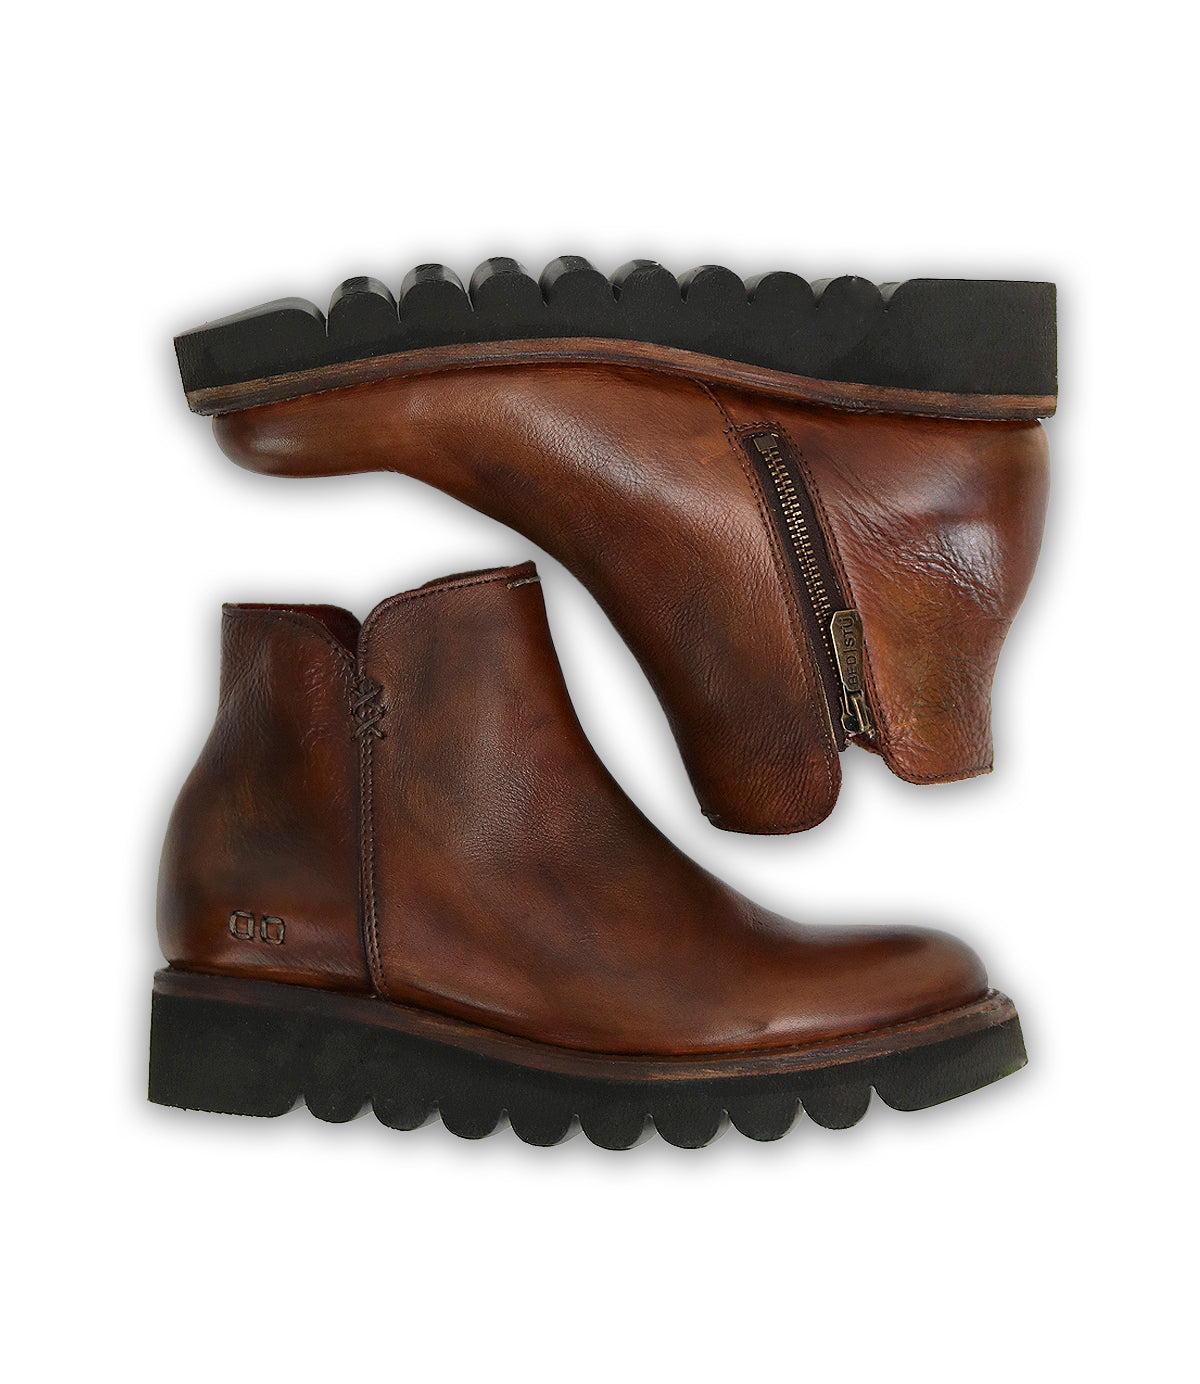 A pair of Lydyi Bed Stu brown leather ankle boots.